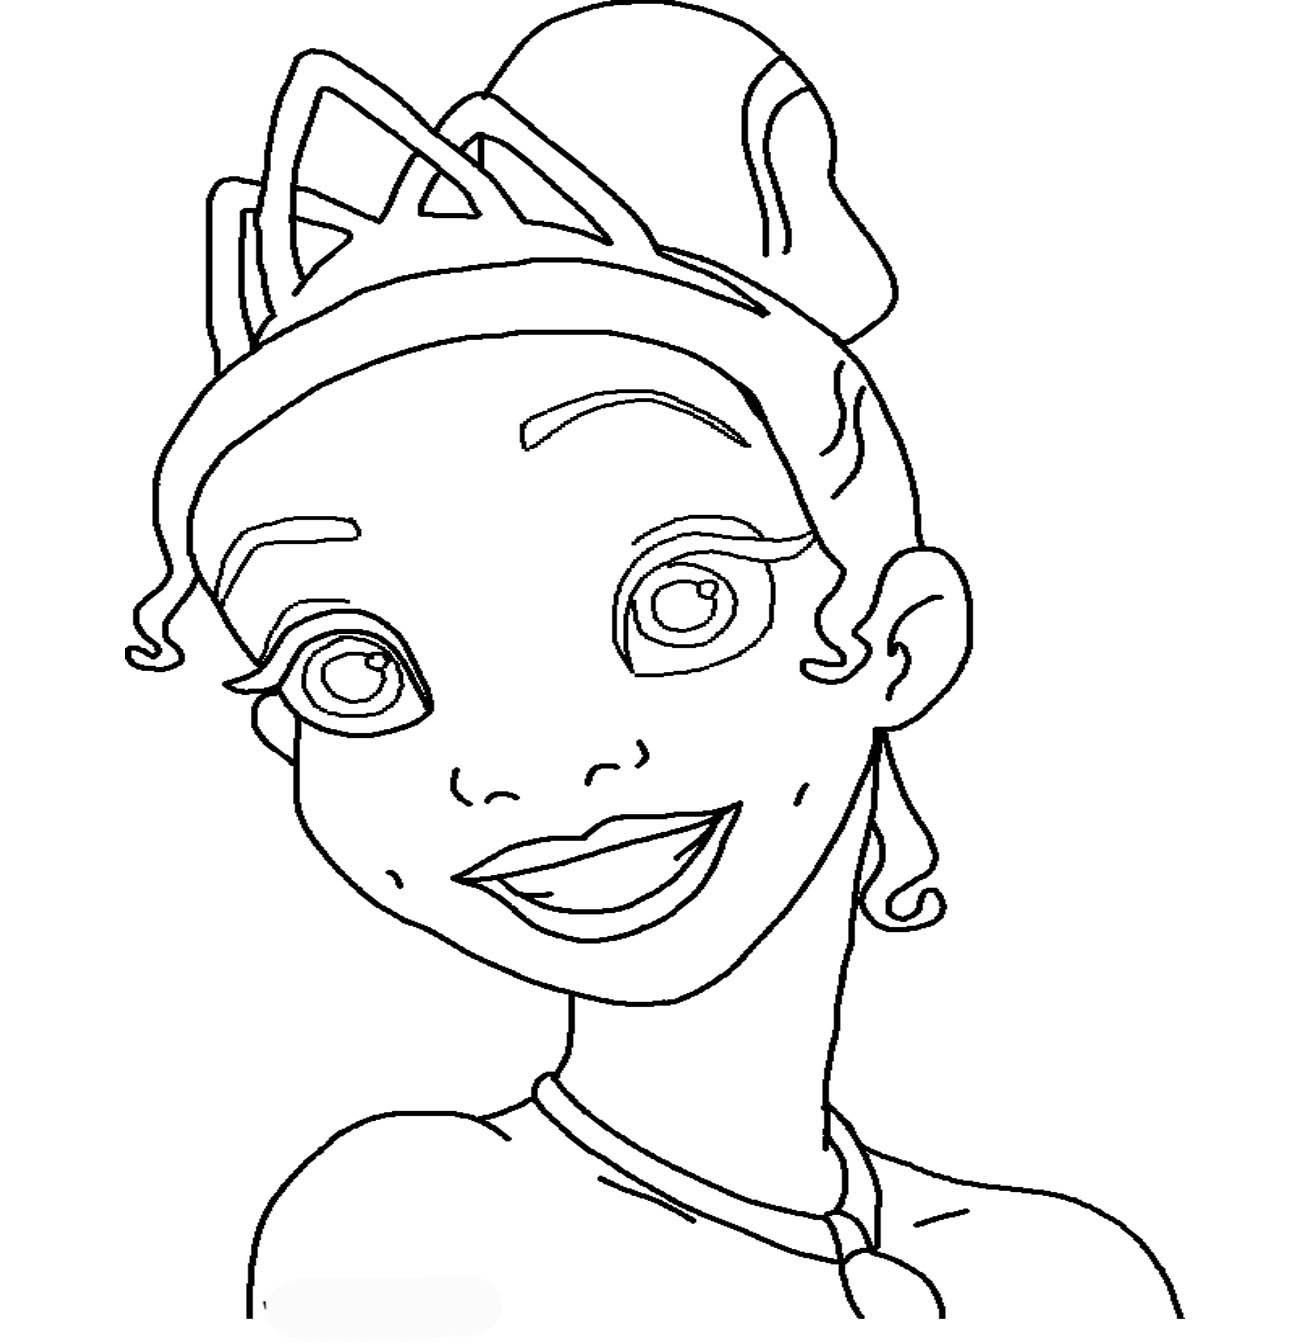 Coloring Pages For Girls Princess
 Disney Princess Tiana Coloring Pages To Girls